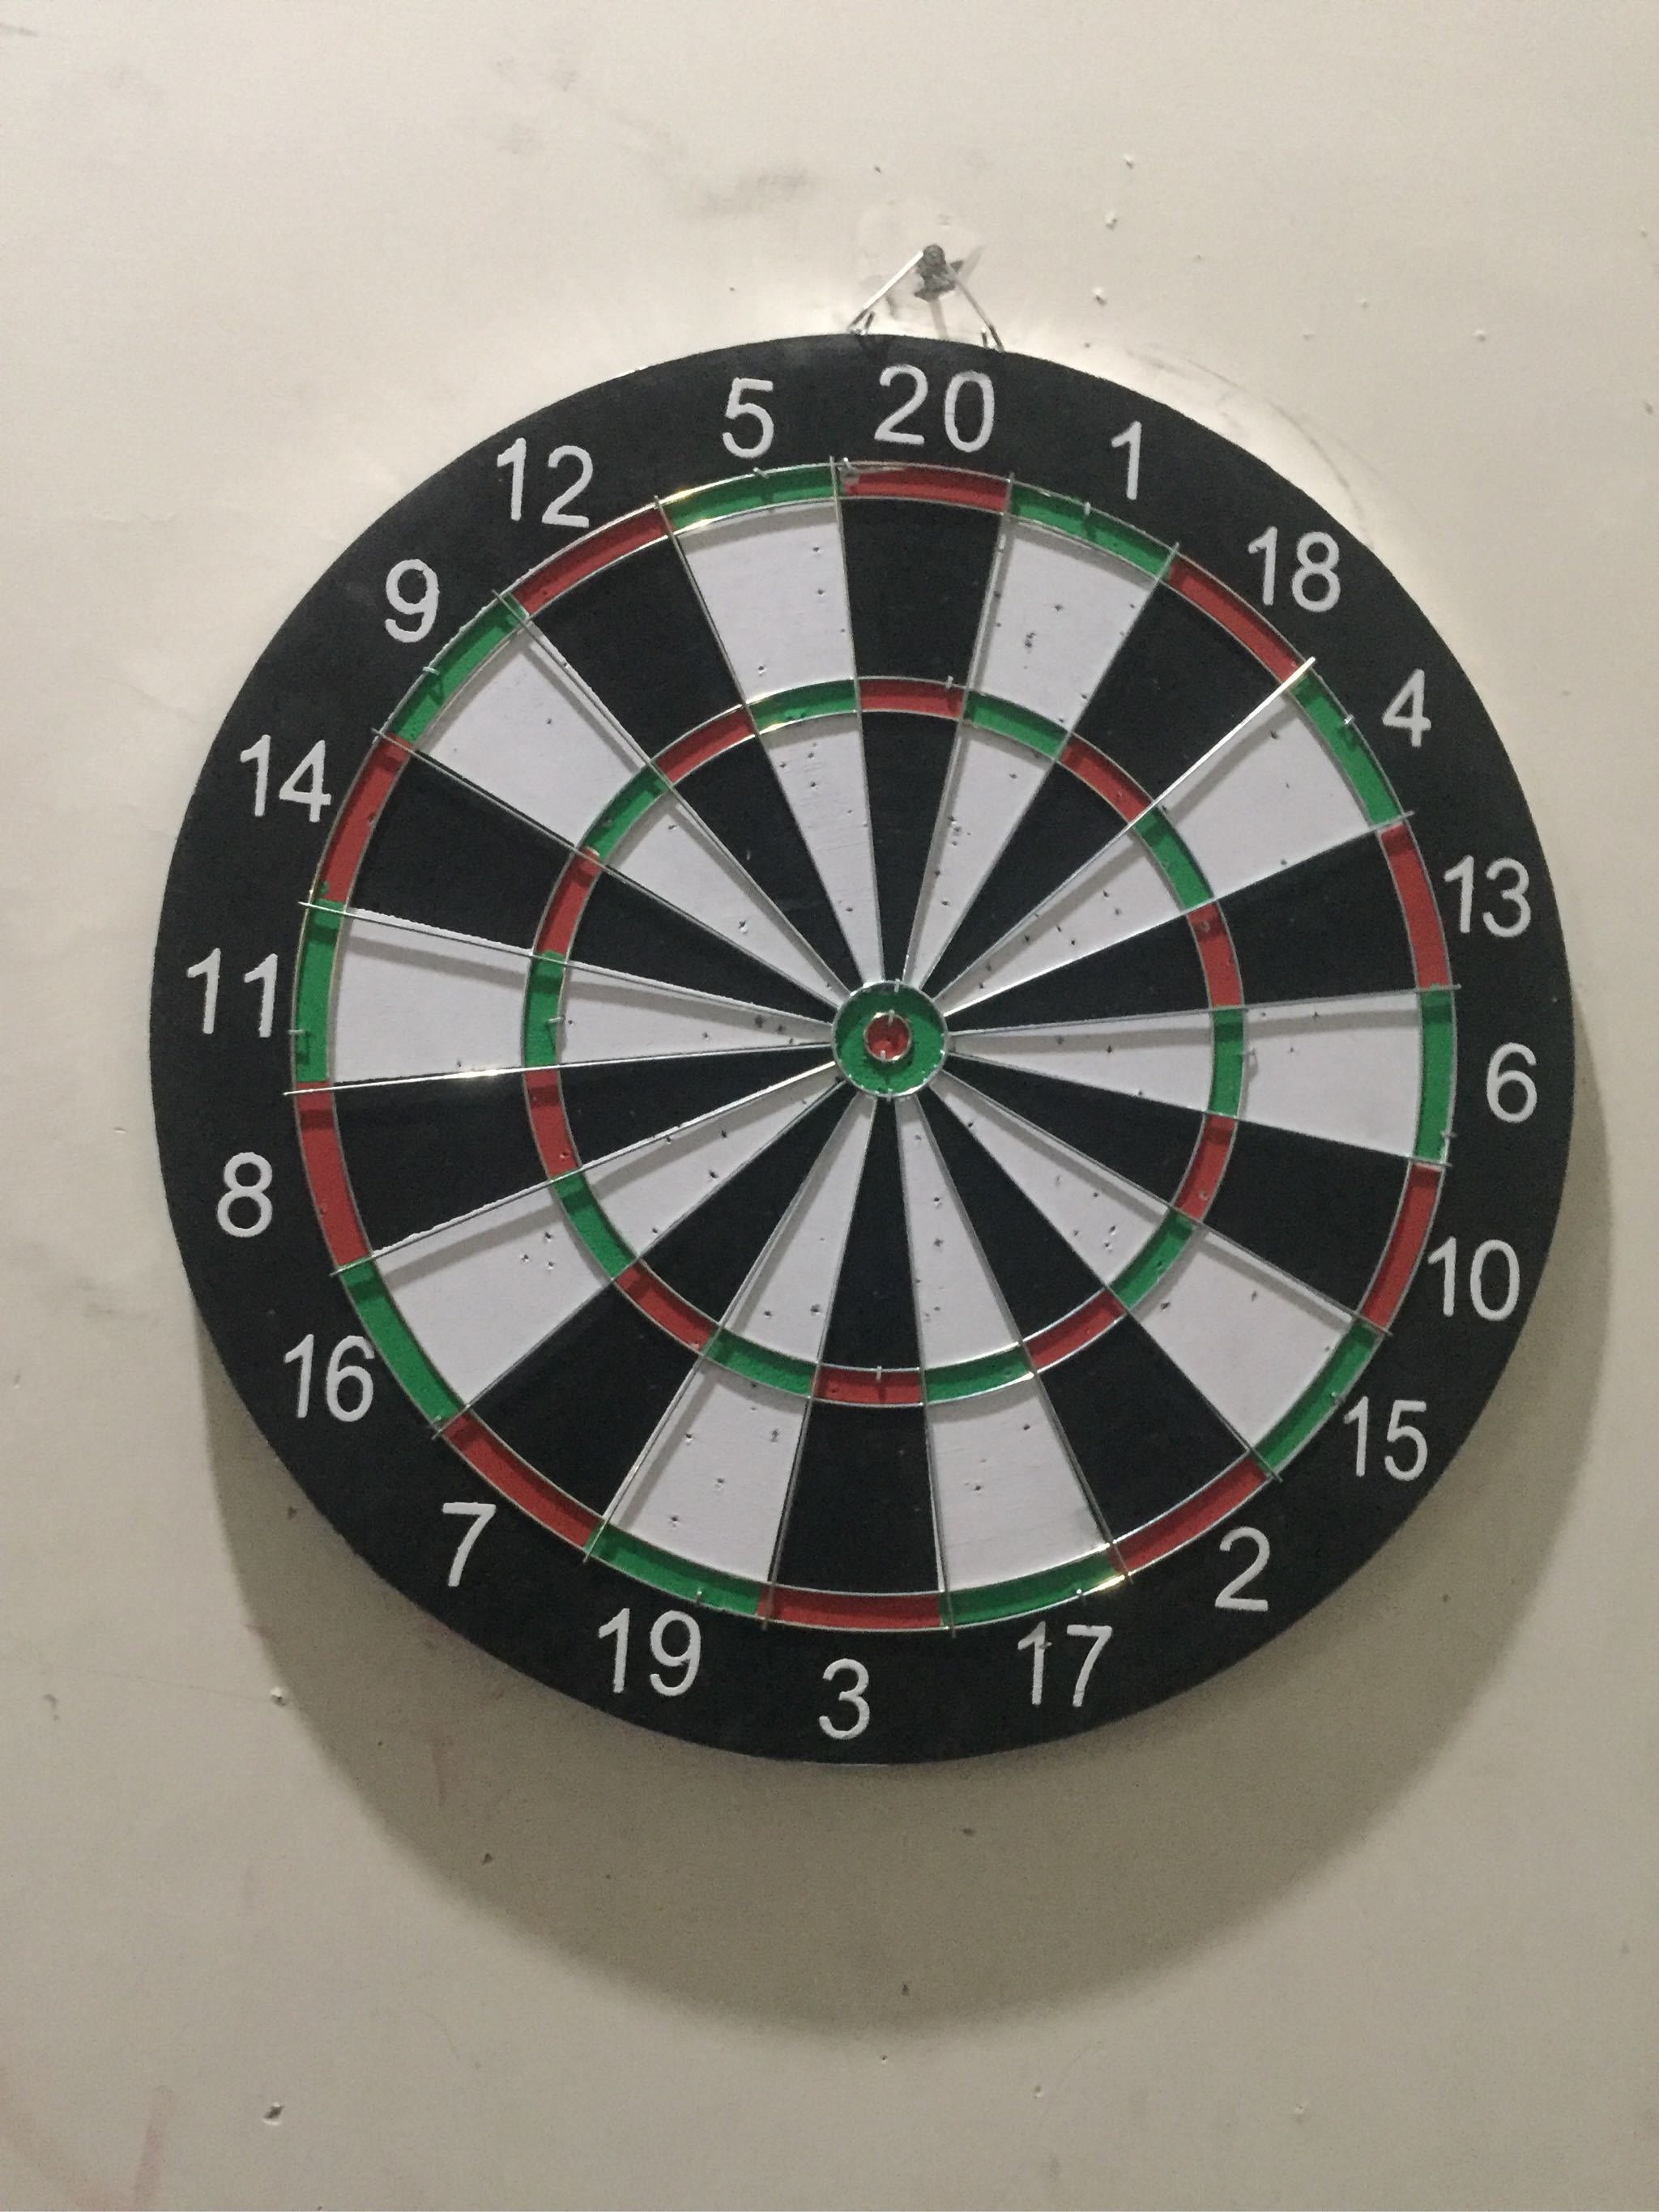  "18"" Dart Board with 6 Darts and 1 Double Sided score Game Set"